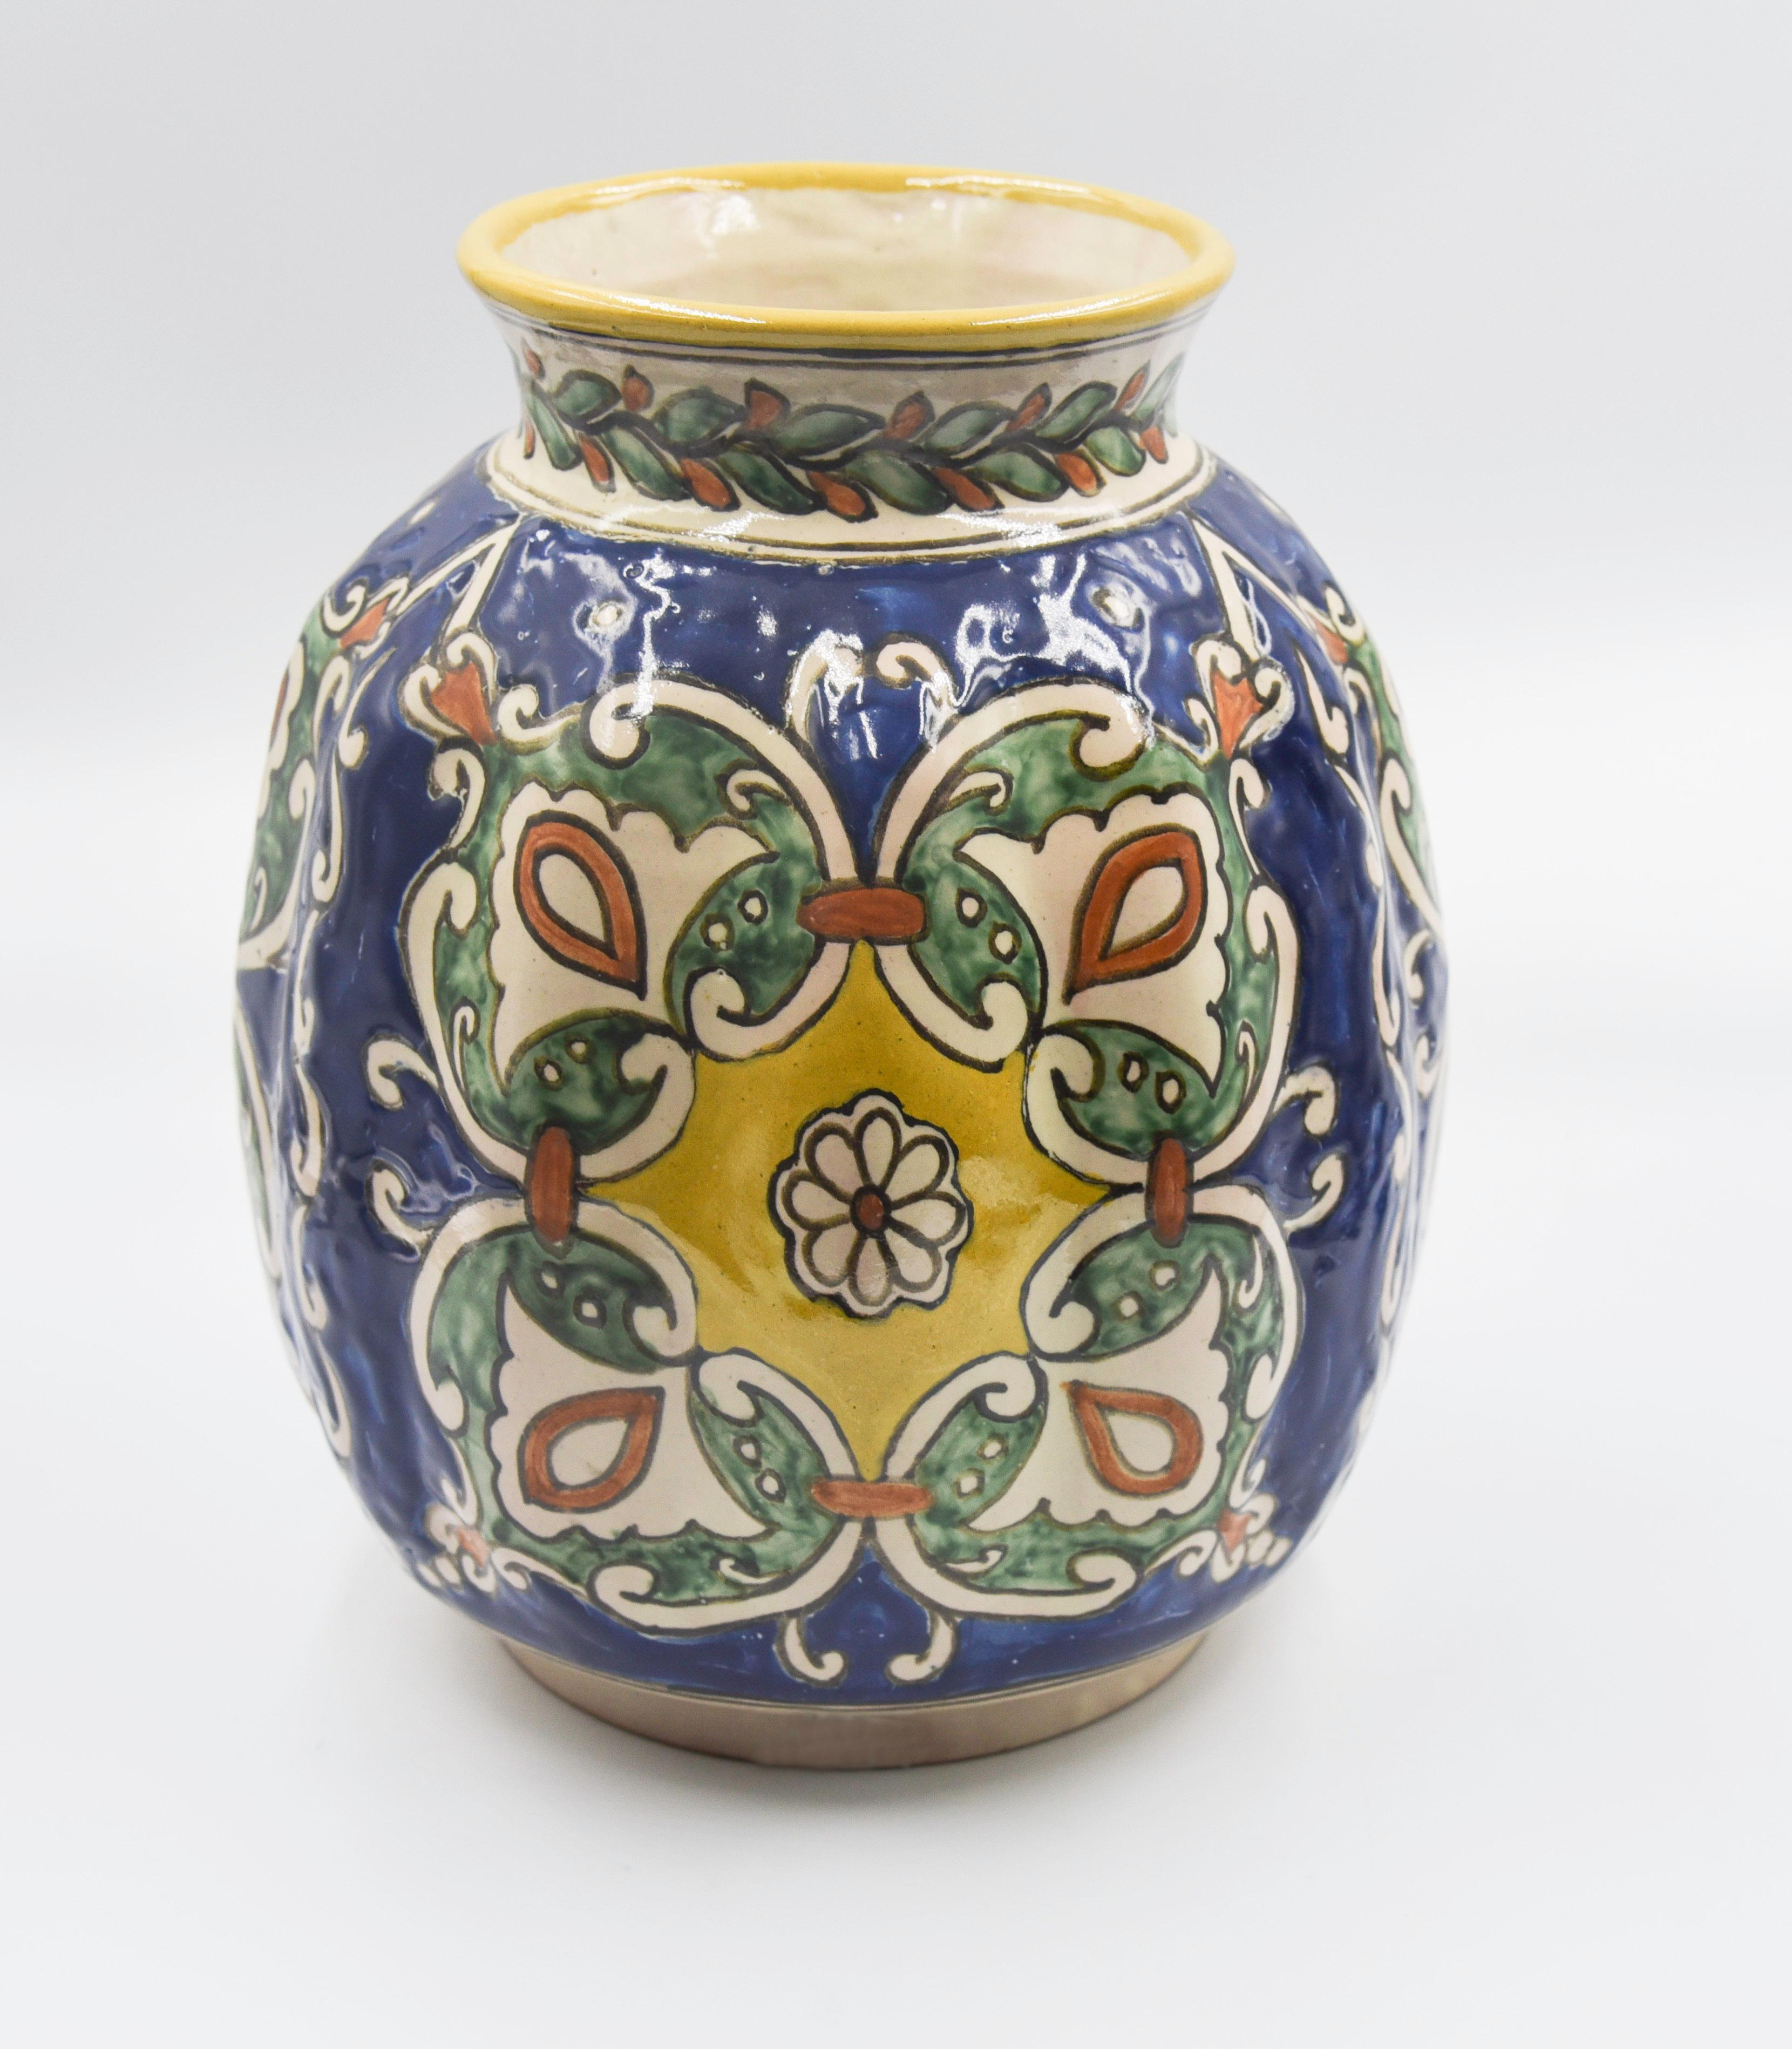 An elegant vintage vase, crafted by master ceramist Cesar Torres, in Talavera technique with a colonial and baroque design. 

The Talavera is not just a simple painted ceramic: its exquisite decoration is the product of a delicate process of